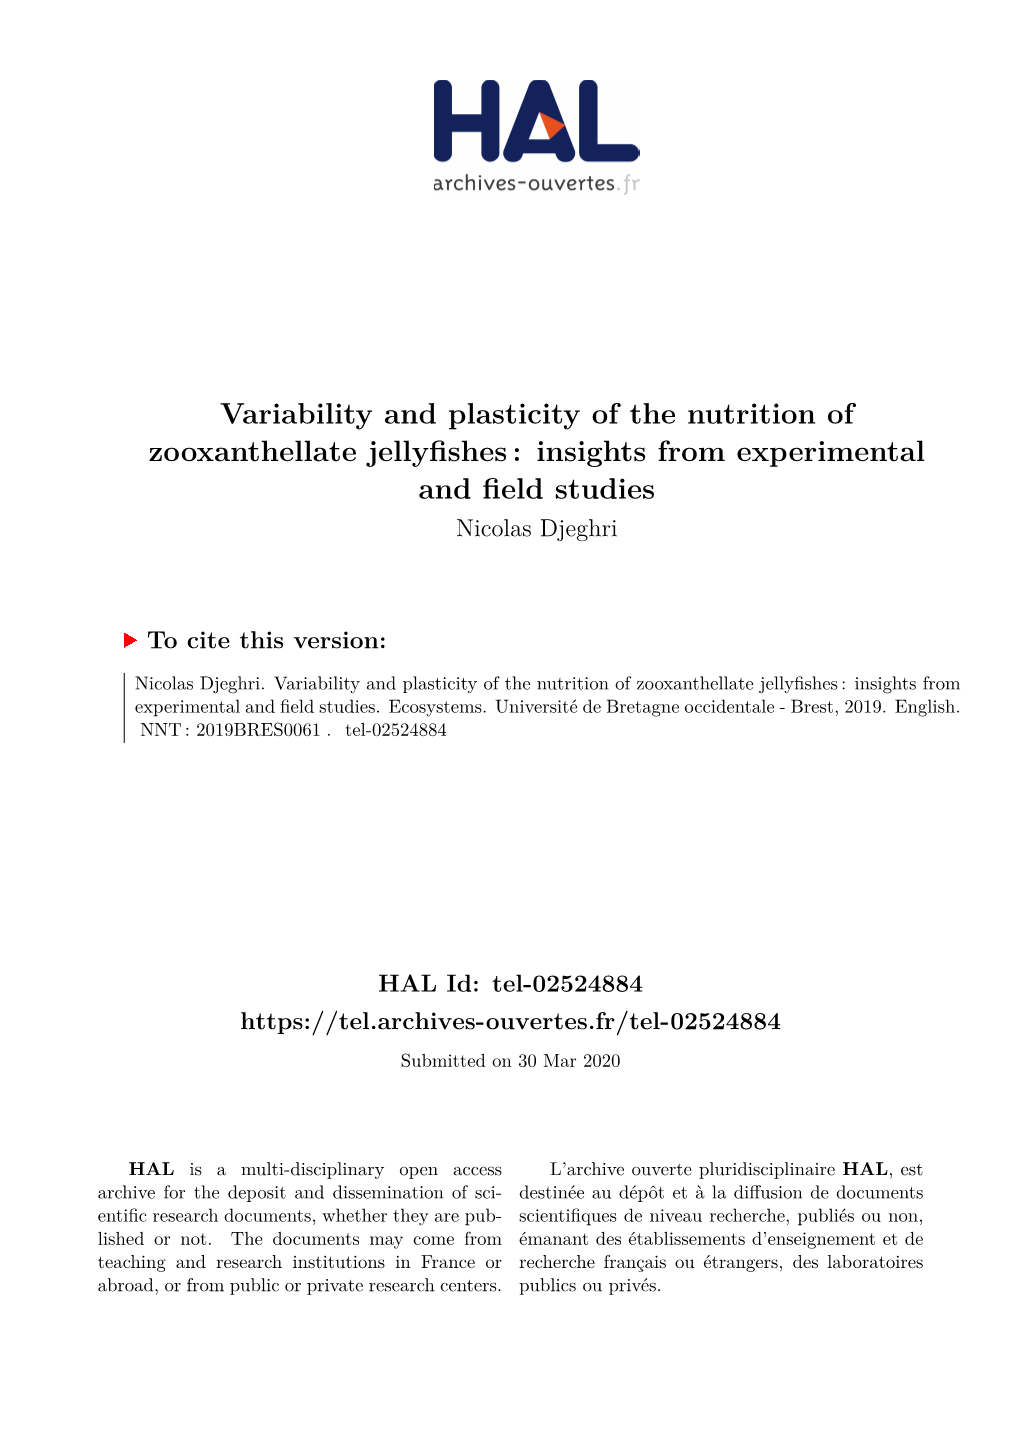 Variability and Plasticity of the Nutrition of Zooxanthellate Jellyfishes : Insights from Experimental and Field Studies Nicolas Djeghri